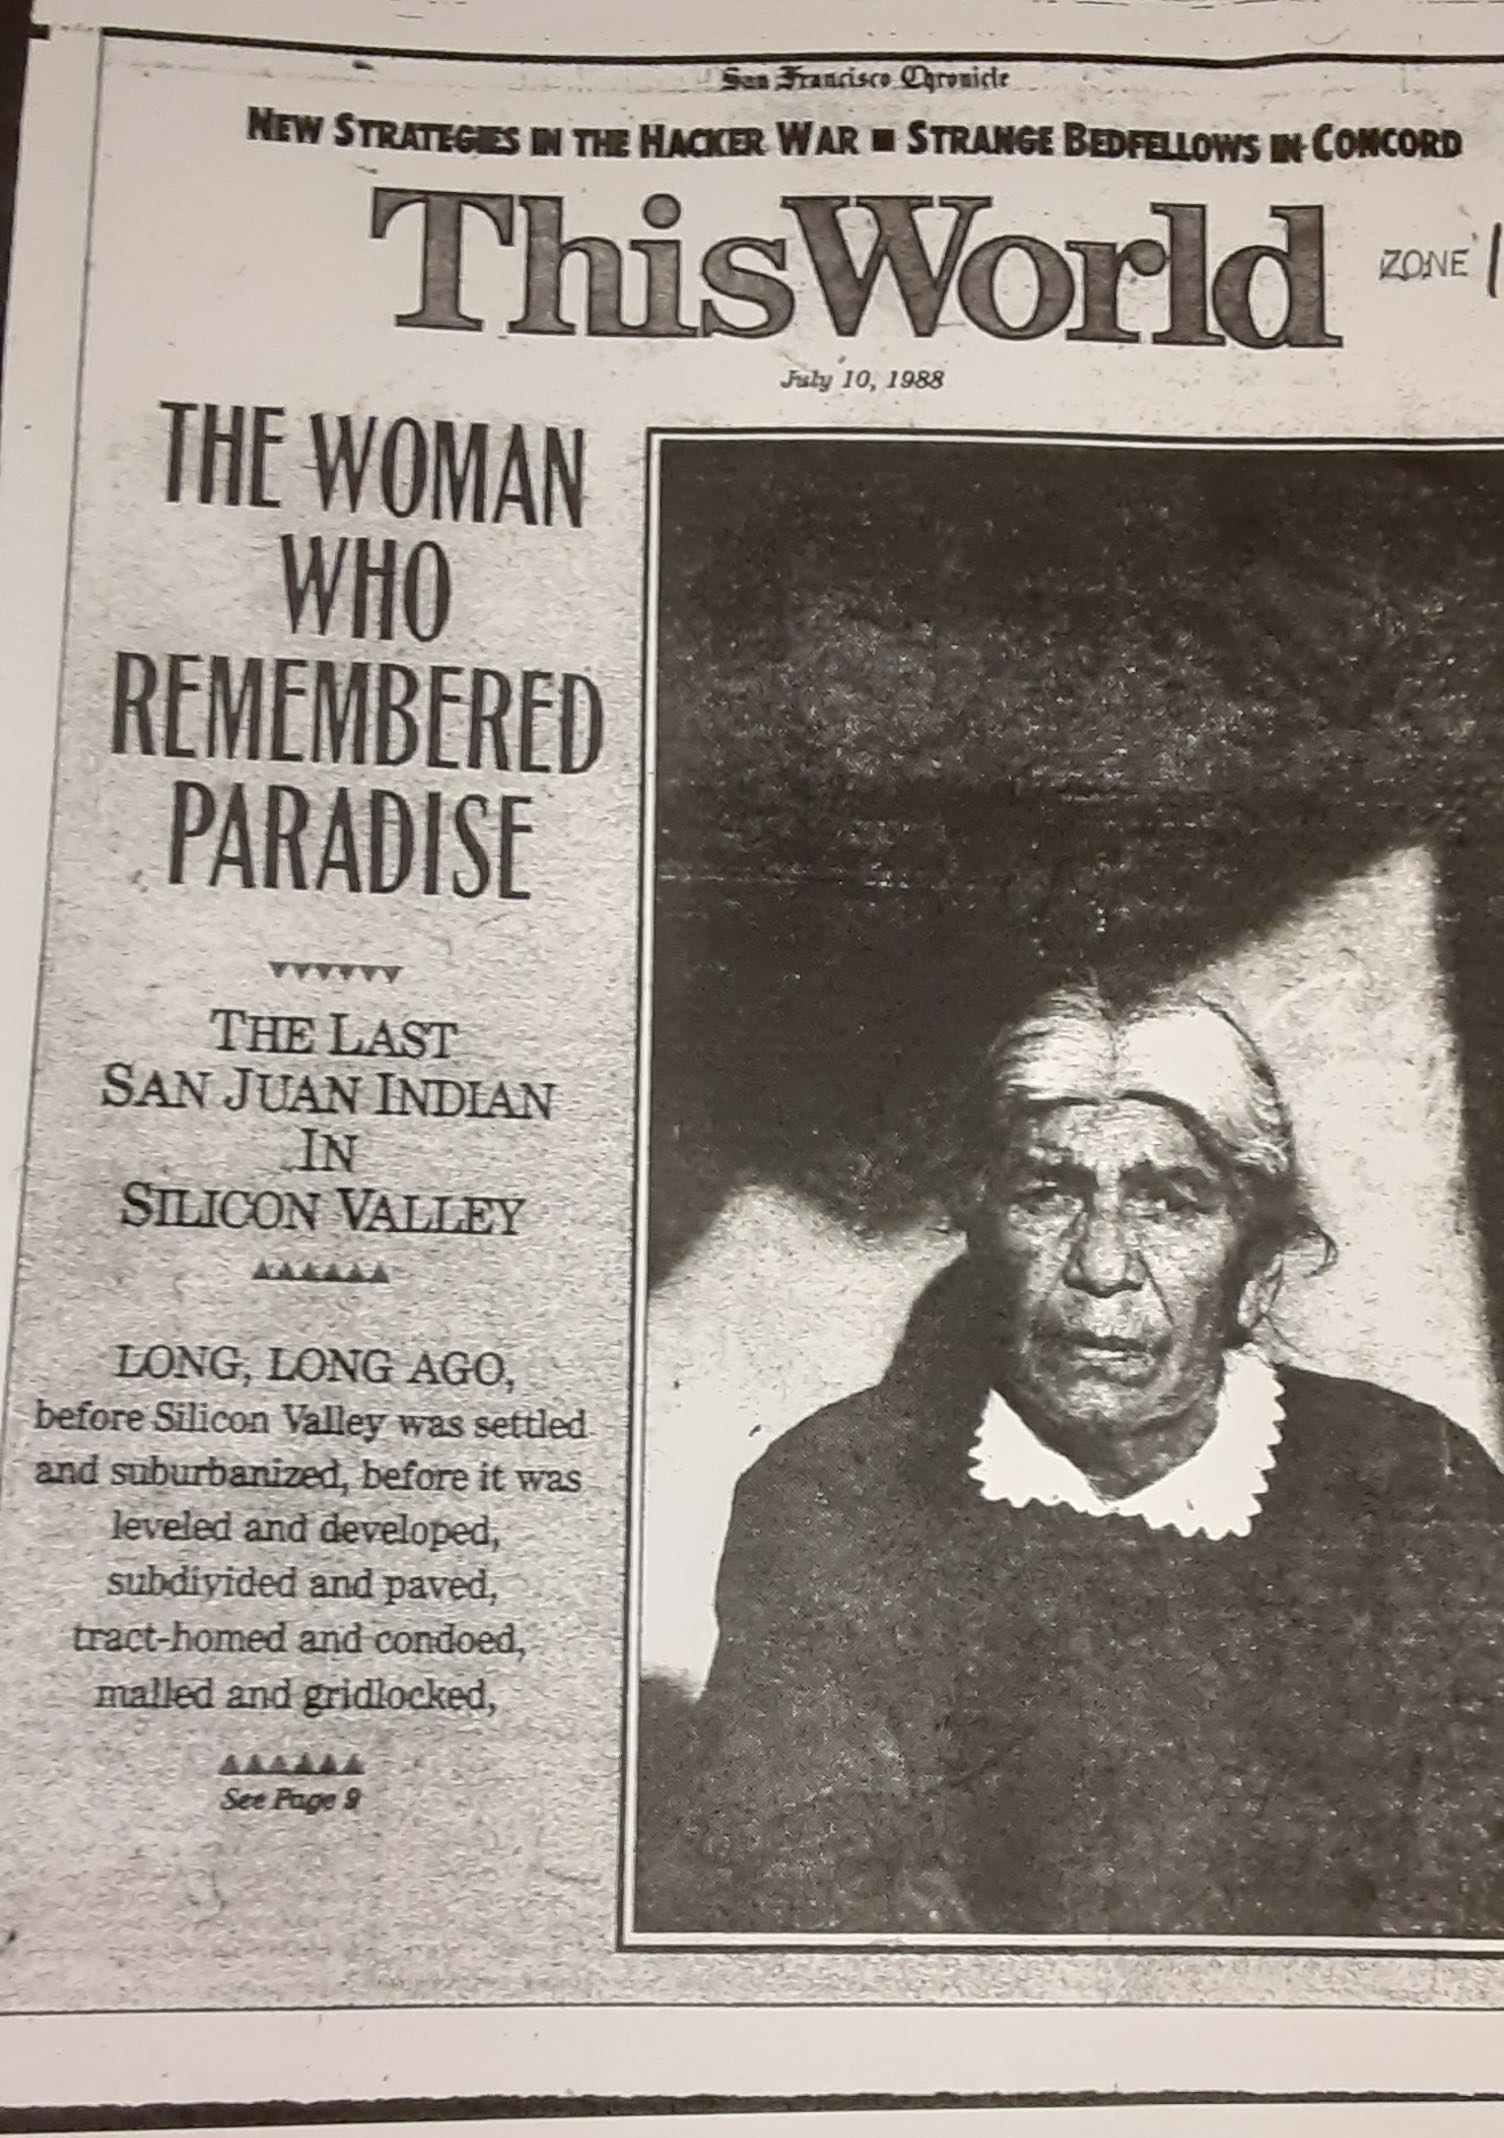 The Woman Who Remembered Paradise